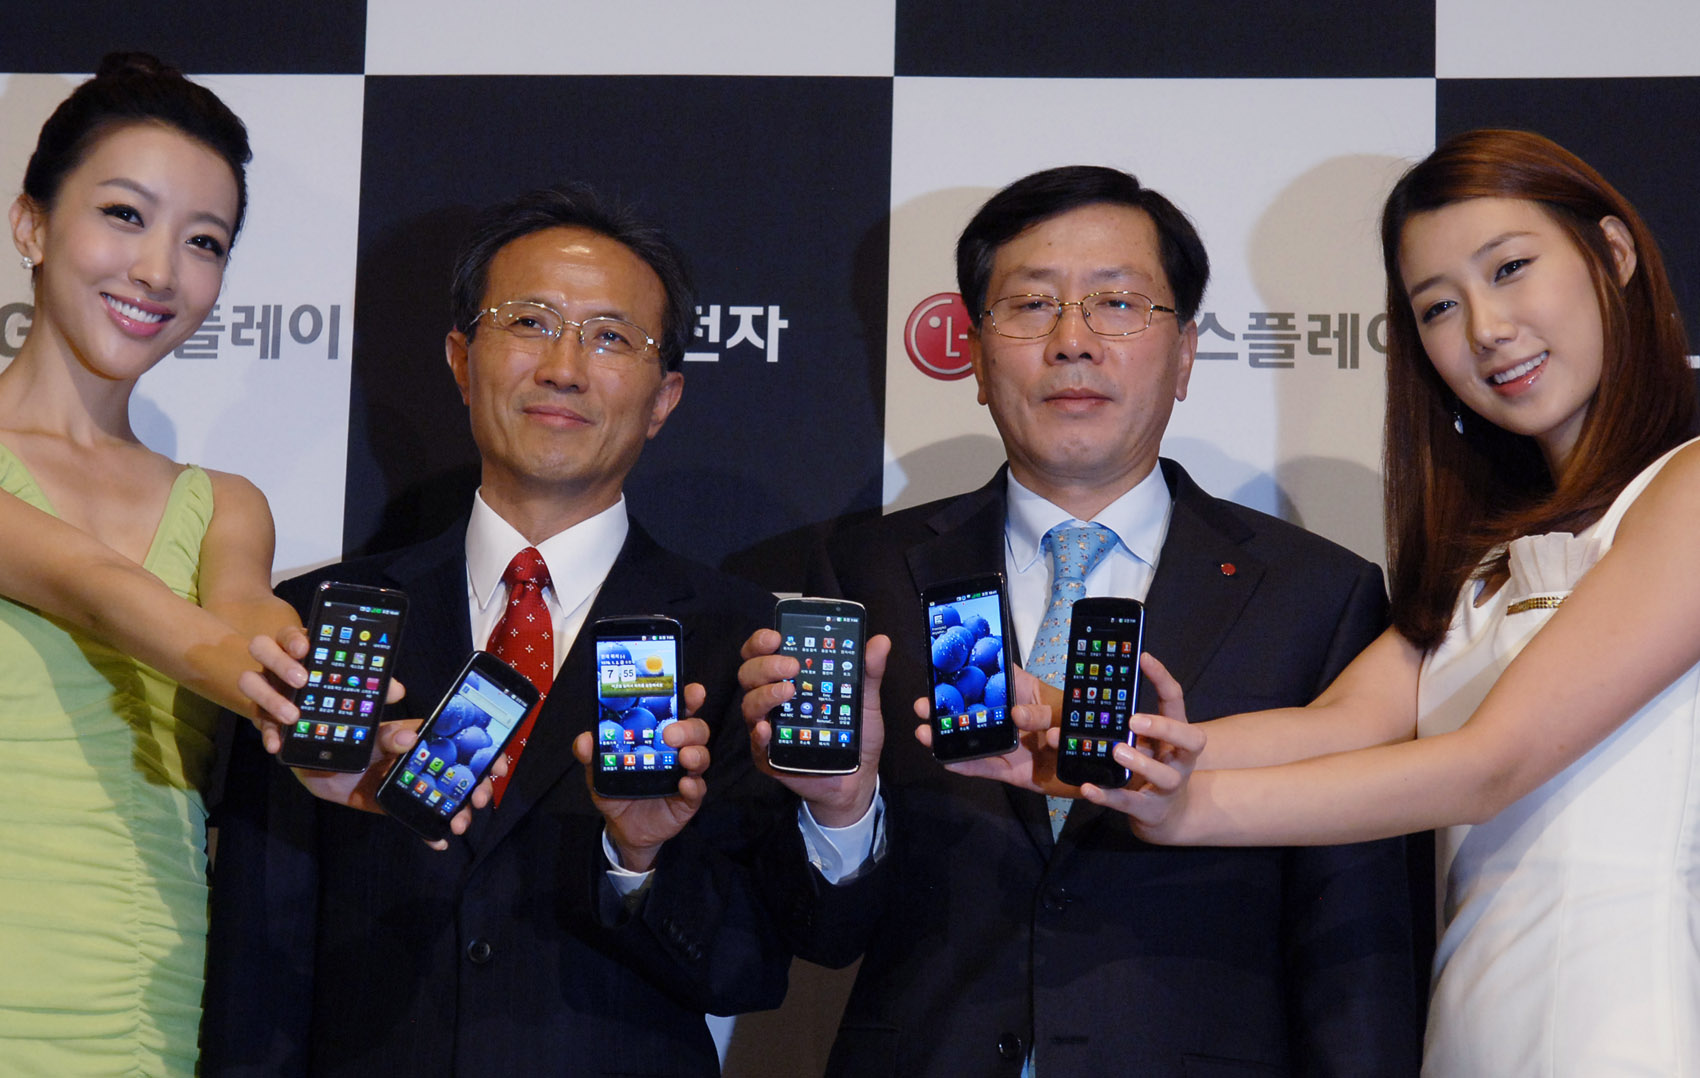 Sang-deok Yeo, Head of Mobile/OLED Department at LG Display, Young-bae, Na, Head of Business Marketing at LG Electronics Mobile Communication Company and two female models hold LG Optimus 3Ds and show its front views